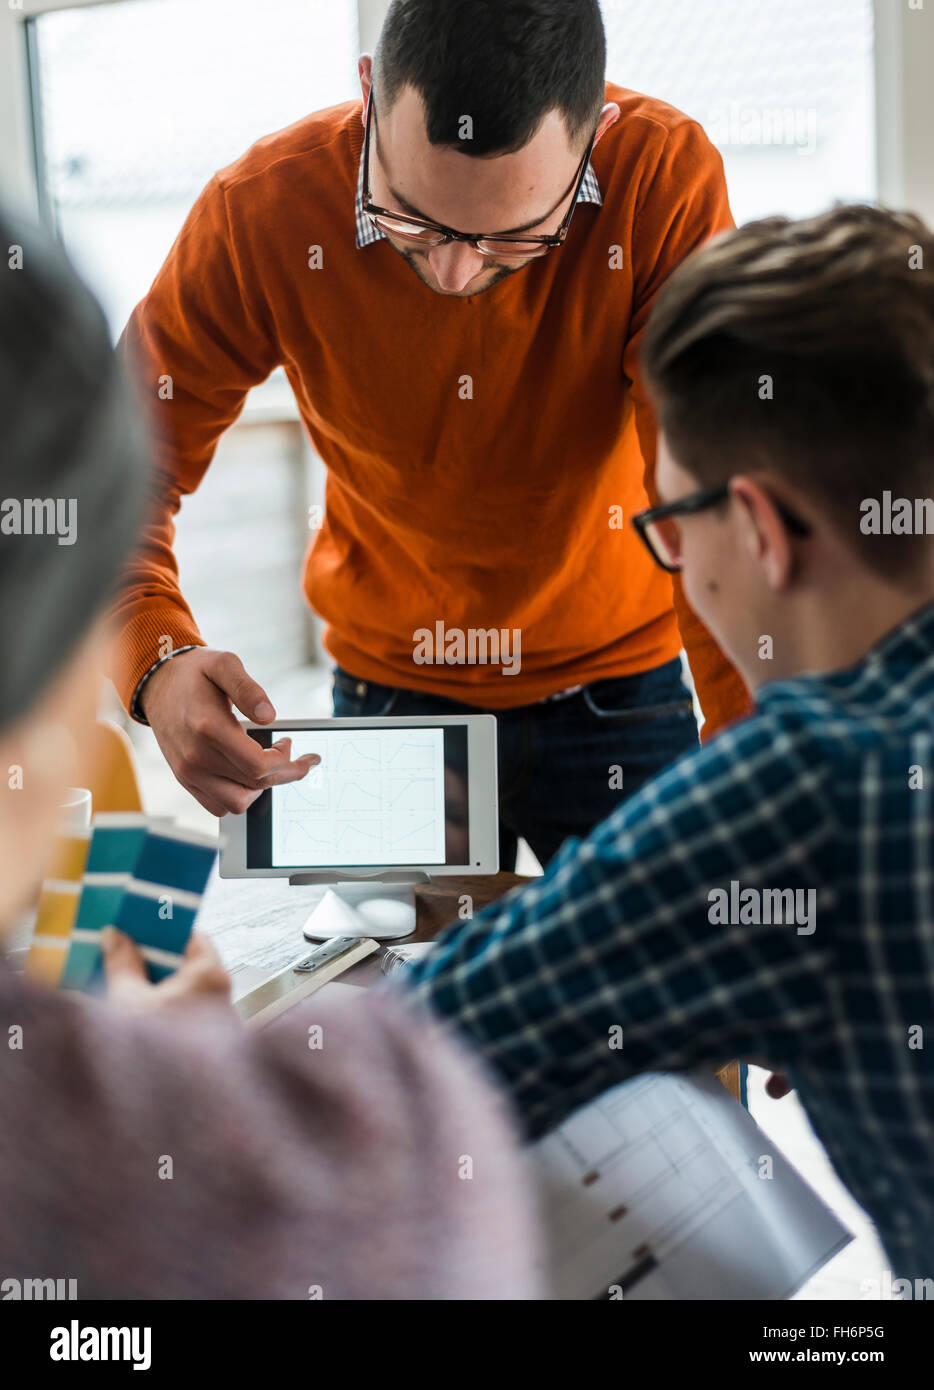 Colleagues in office looking at digital tablet showing different shapes Stock Photo